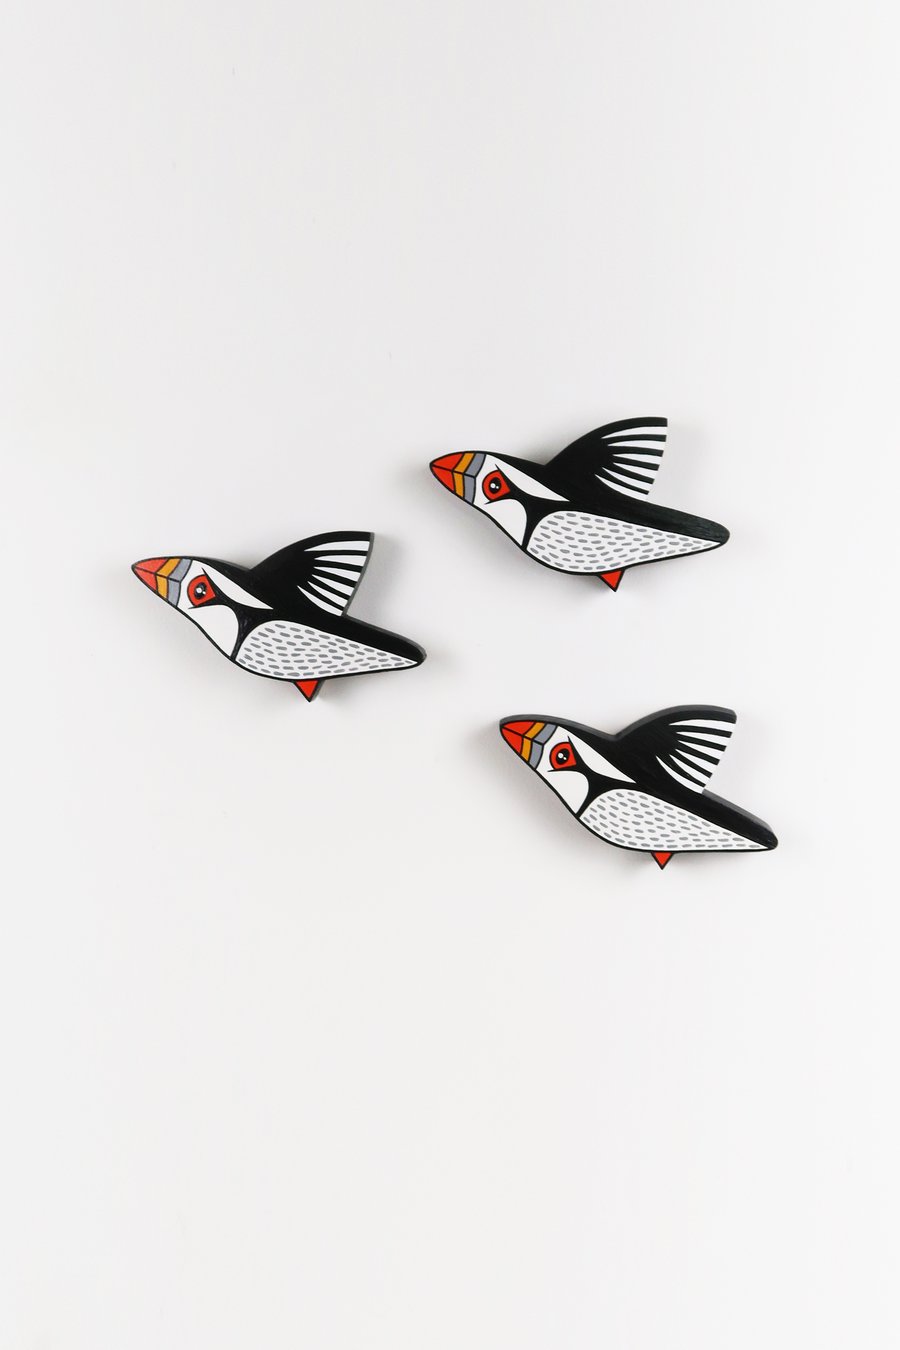 Puffin wall decoration, set of 3 flying miniature birds, wooden, hand painted.